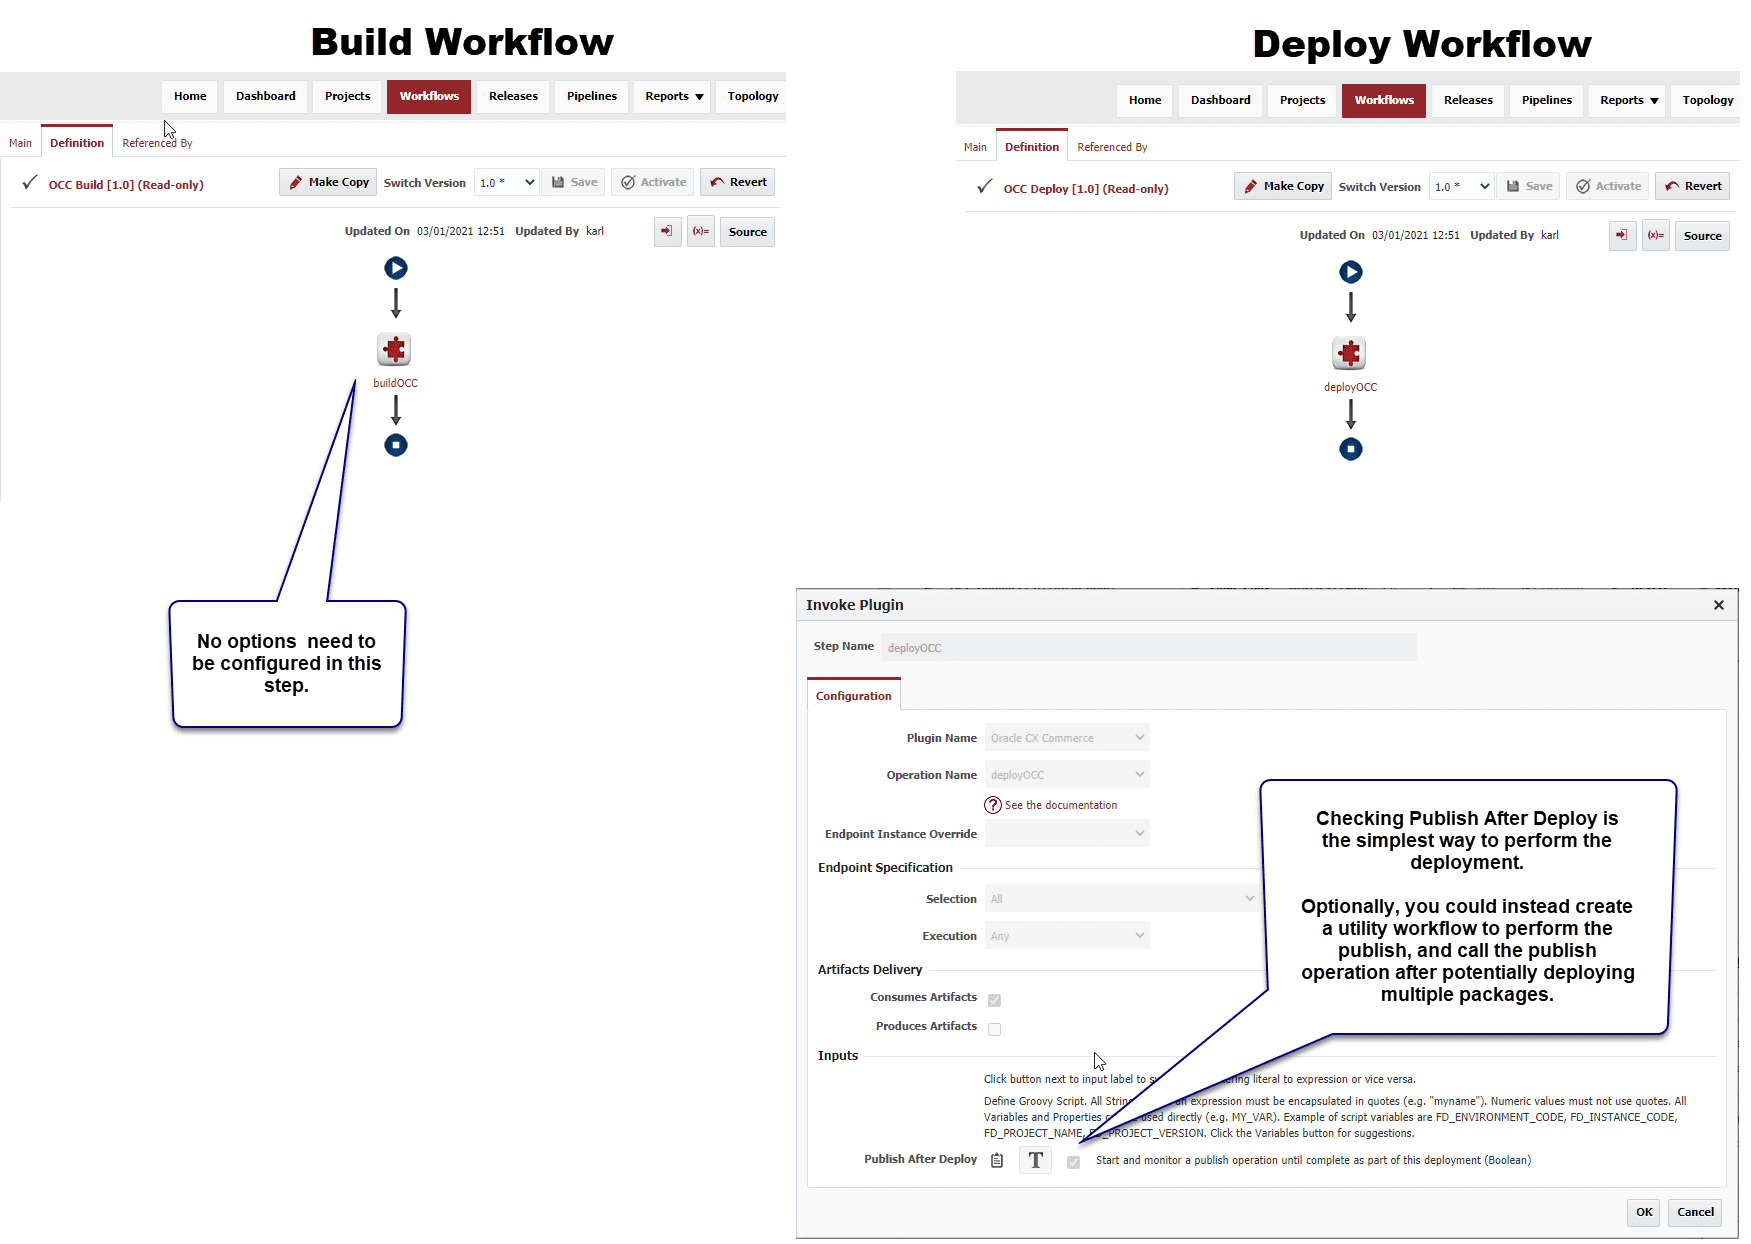 Build workflow and Deploy workflow